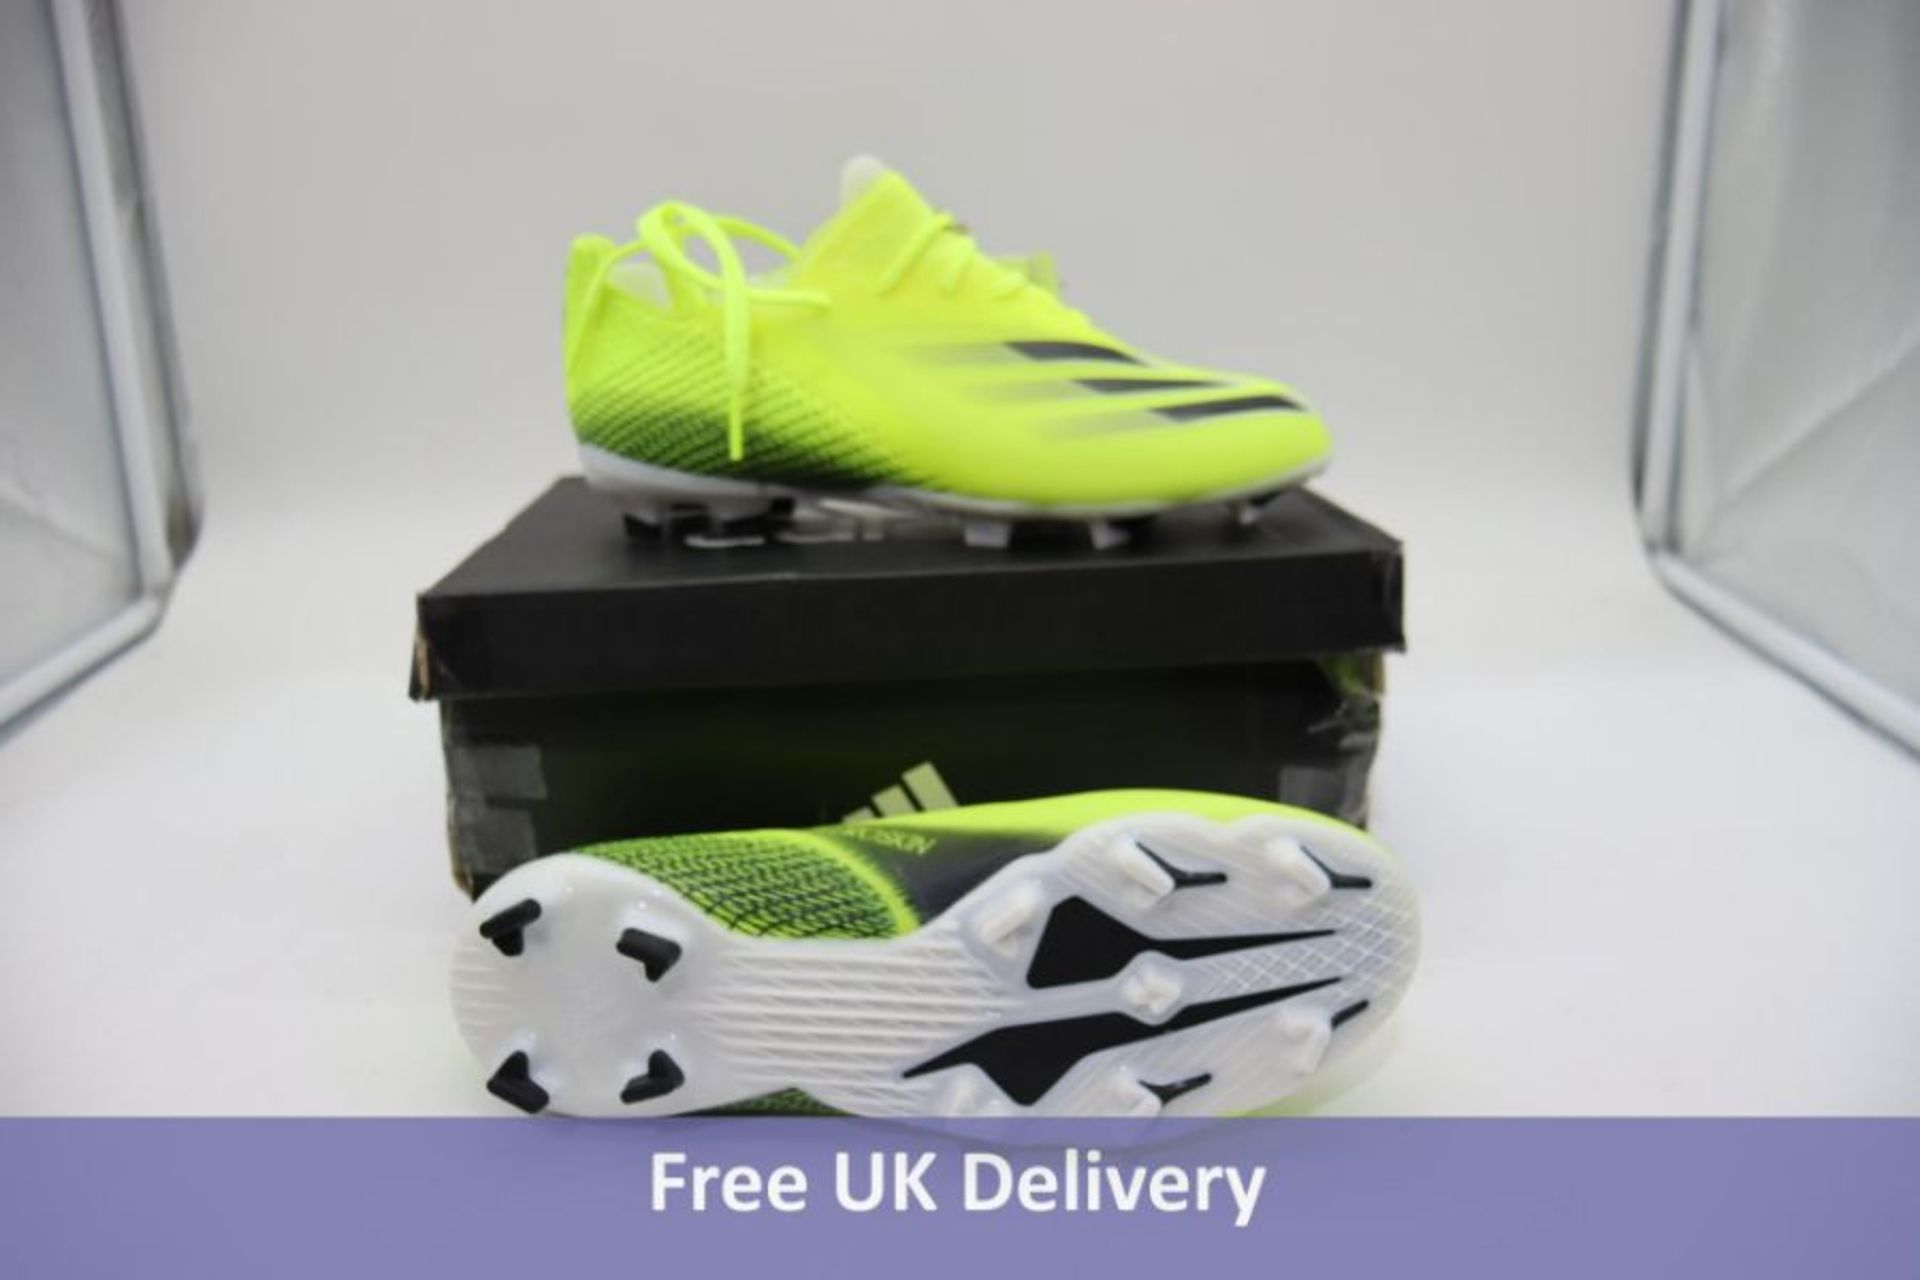 Adidas Junior X Ghosted.1 Firm Ground Boots, Yellow, UK 4, Damaged Box